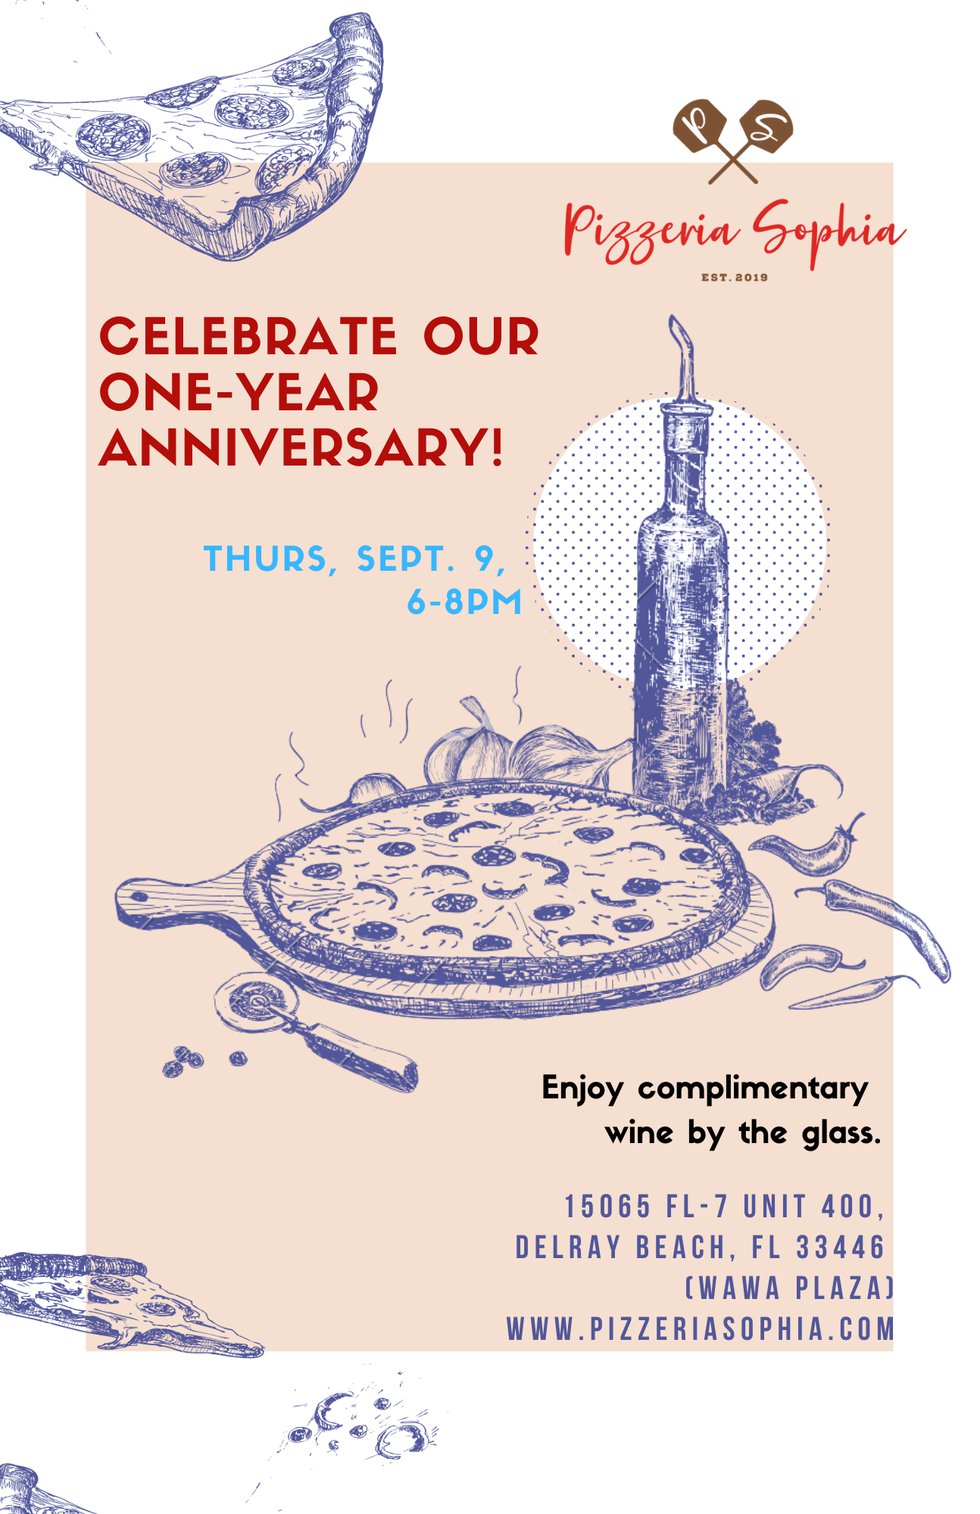 Join us as we celebrate our one-year anniversary!